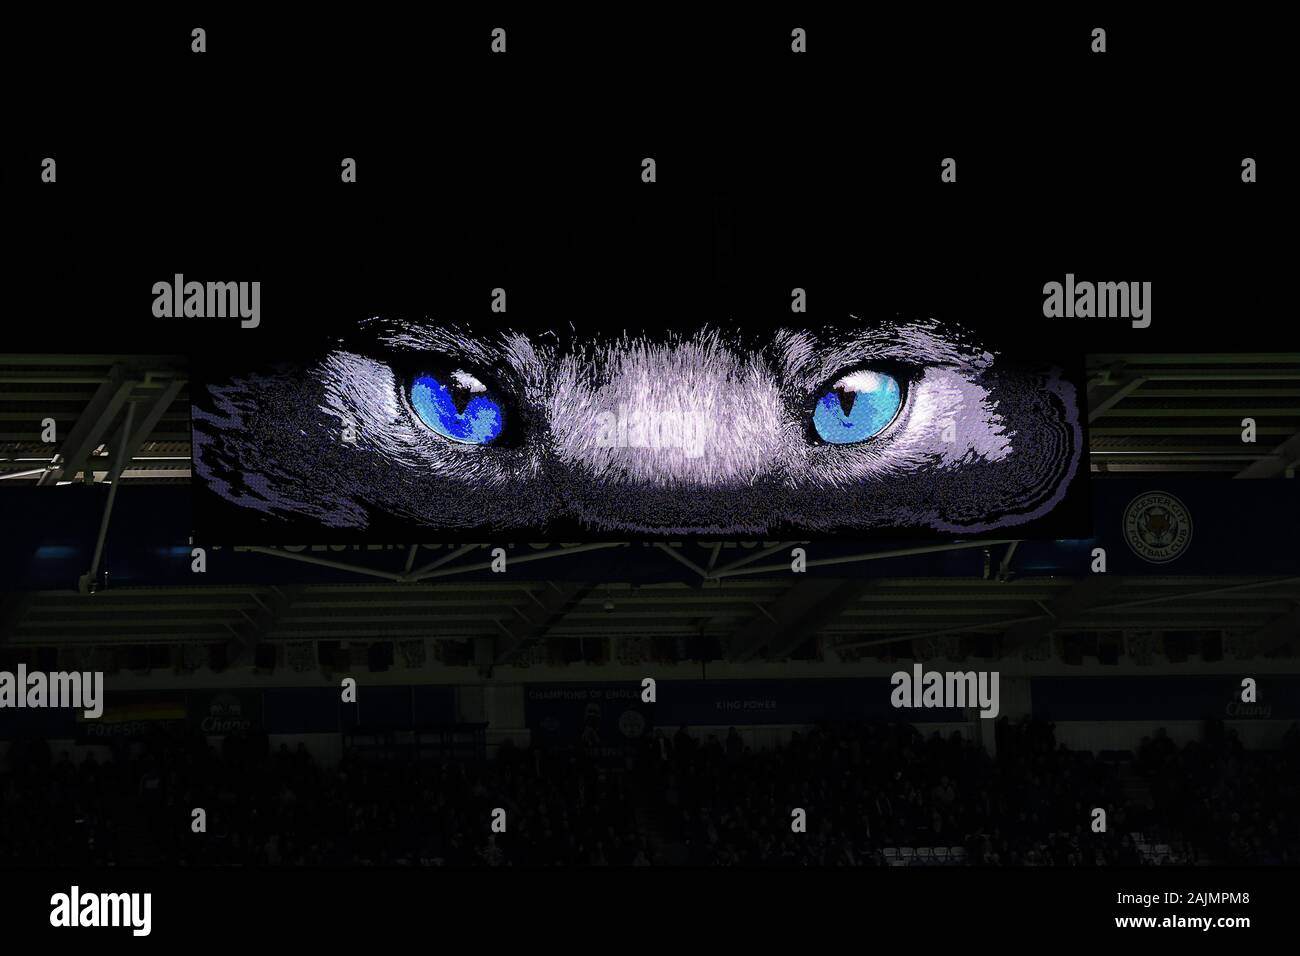 https://c8.alamy.com/comp/2AJMPM8/leicester-uk-4-january-2020-blue-fox-eyes-during-the-fa-cup-third-round-match-between-leicester-city-and-wigan-athletic-at-the-king-power-stadium-leicester-on-saturday-4th-january-2020-credit-jon-hobley-mi-news-photograph-may-only-be-used-for-newspaper-andor-magazine-editorial-purposes-license-required-for-commercial-use-credit-mi-news-sport-alamy-live-news-2AJMPM8.jpg